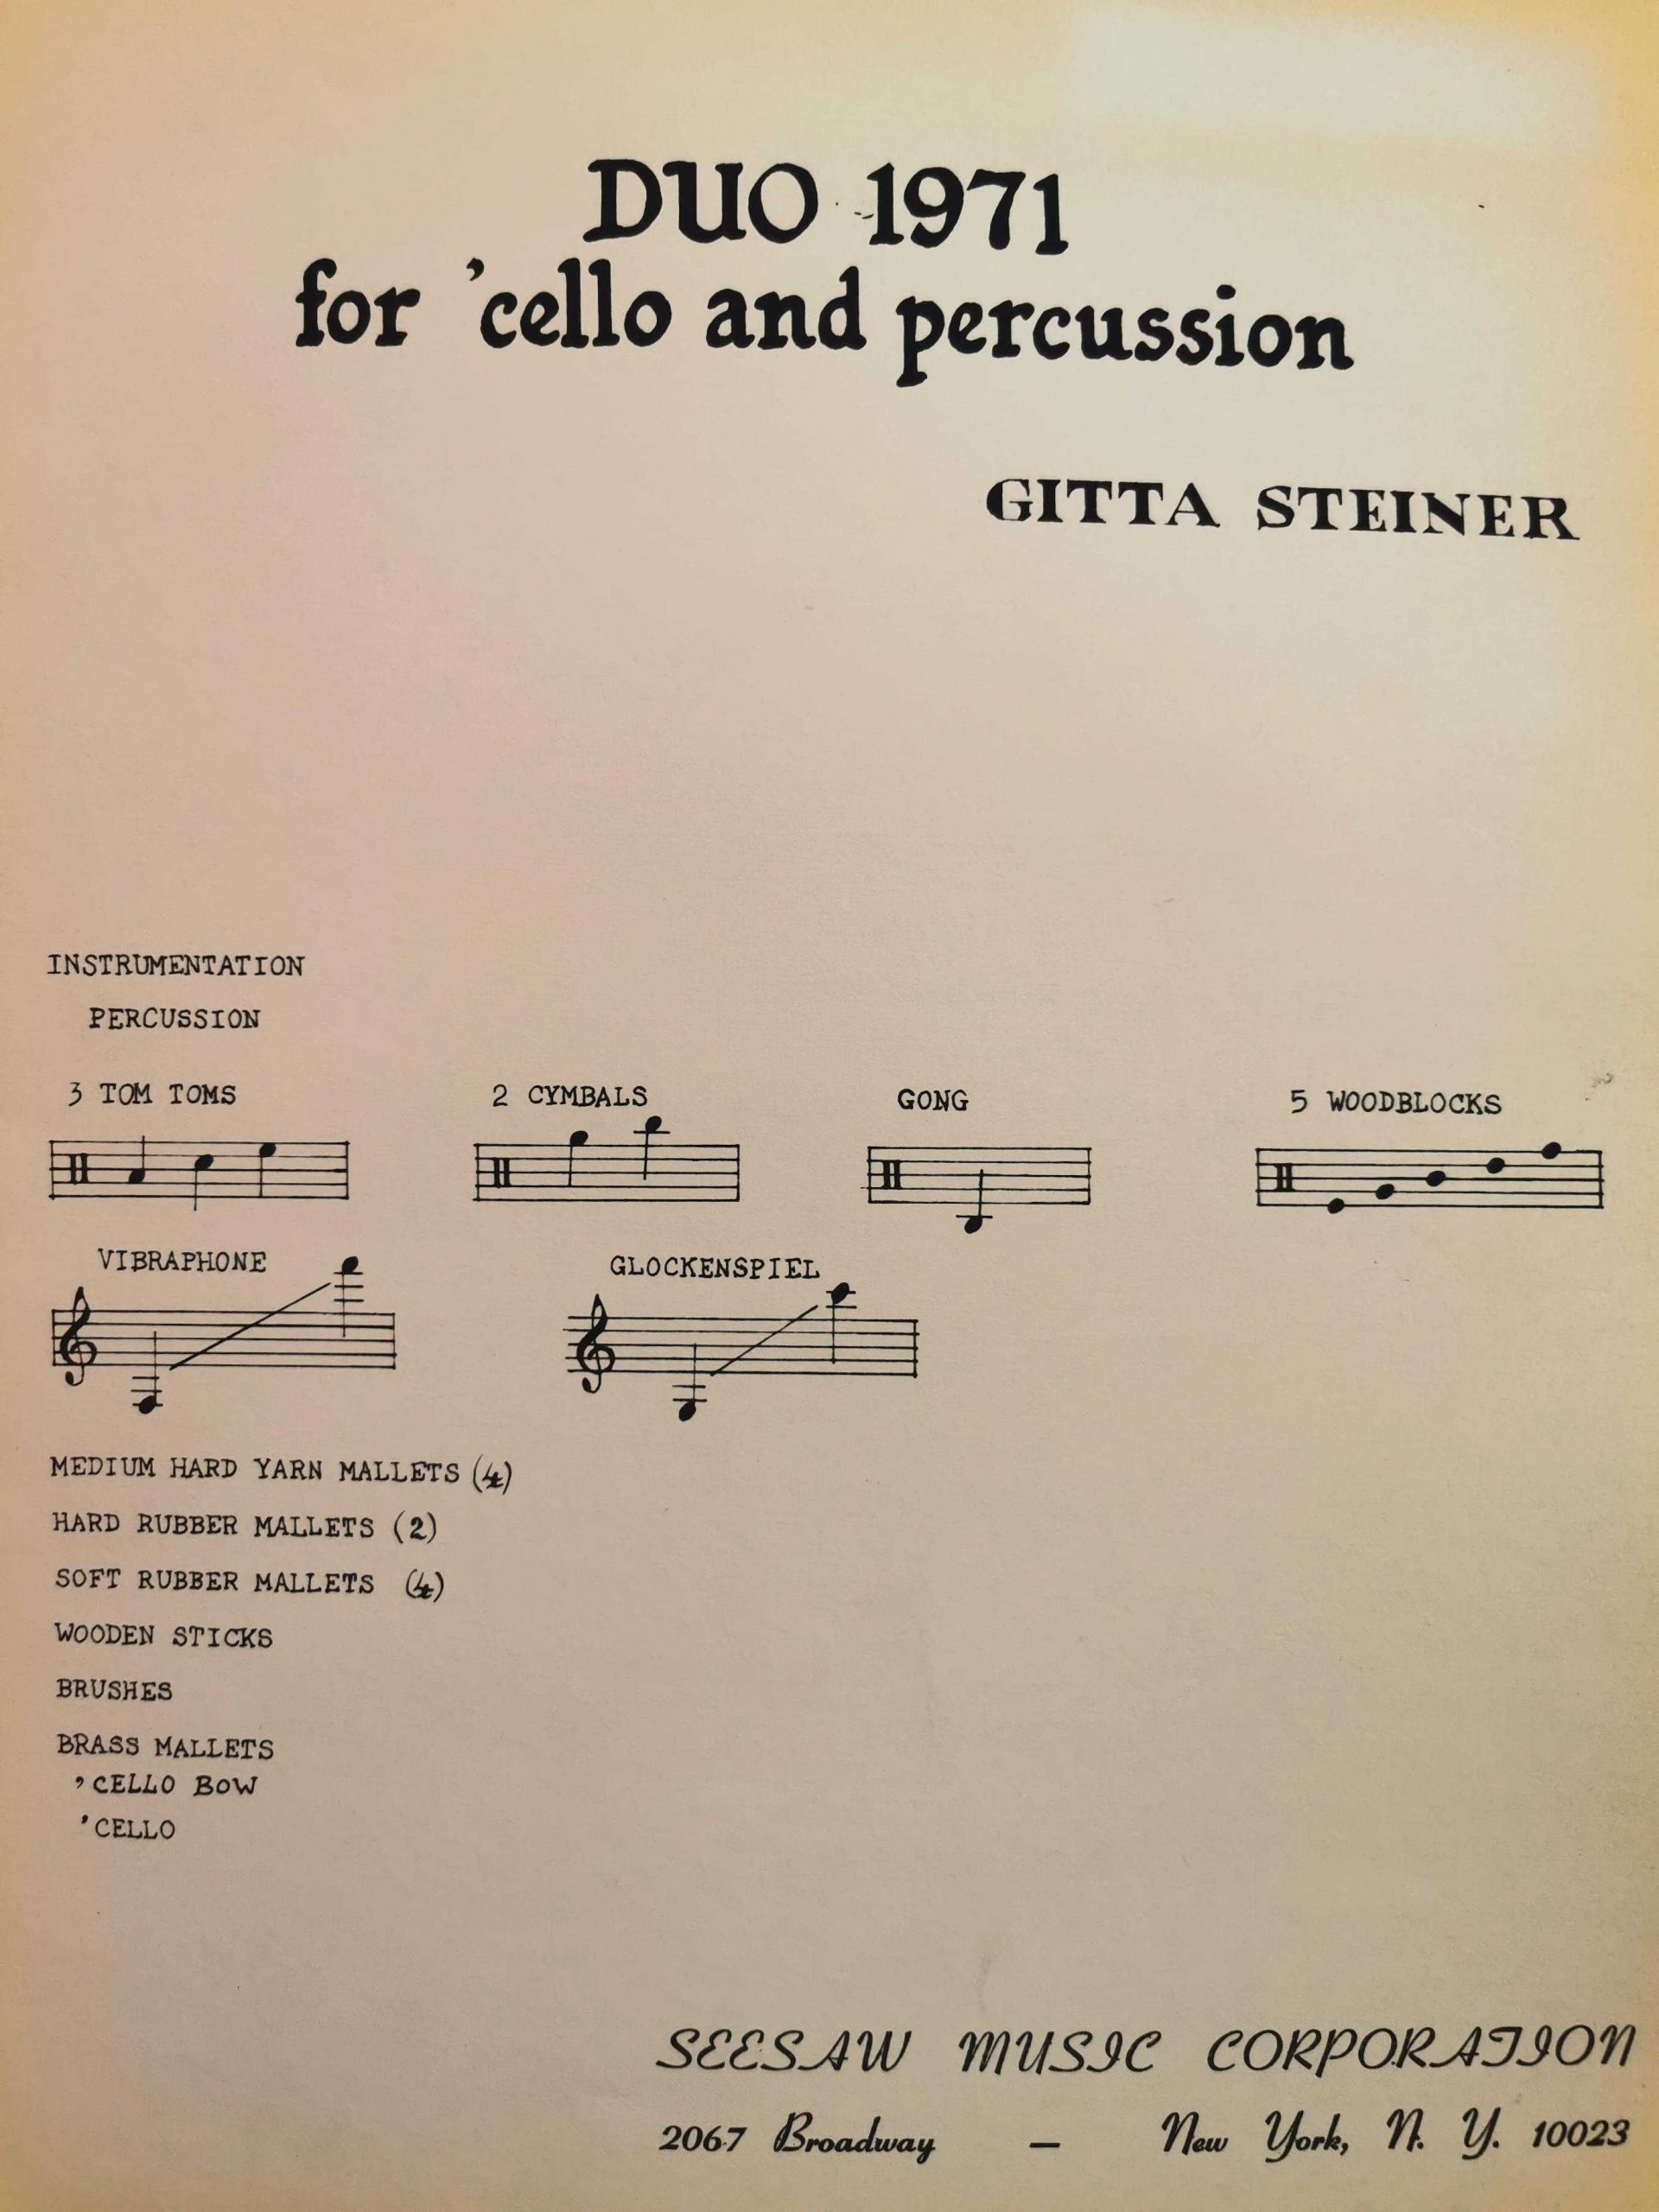 Duo 1971 for Cello and Percussion by Gitta Steiner